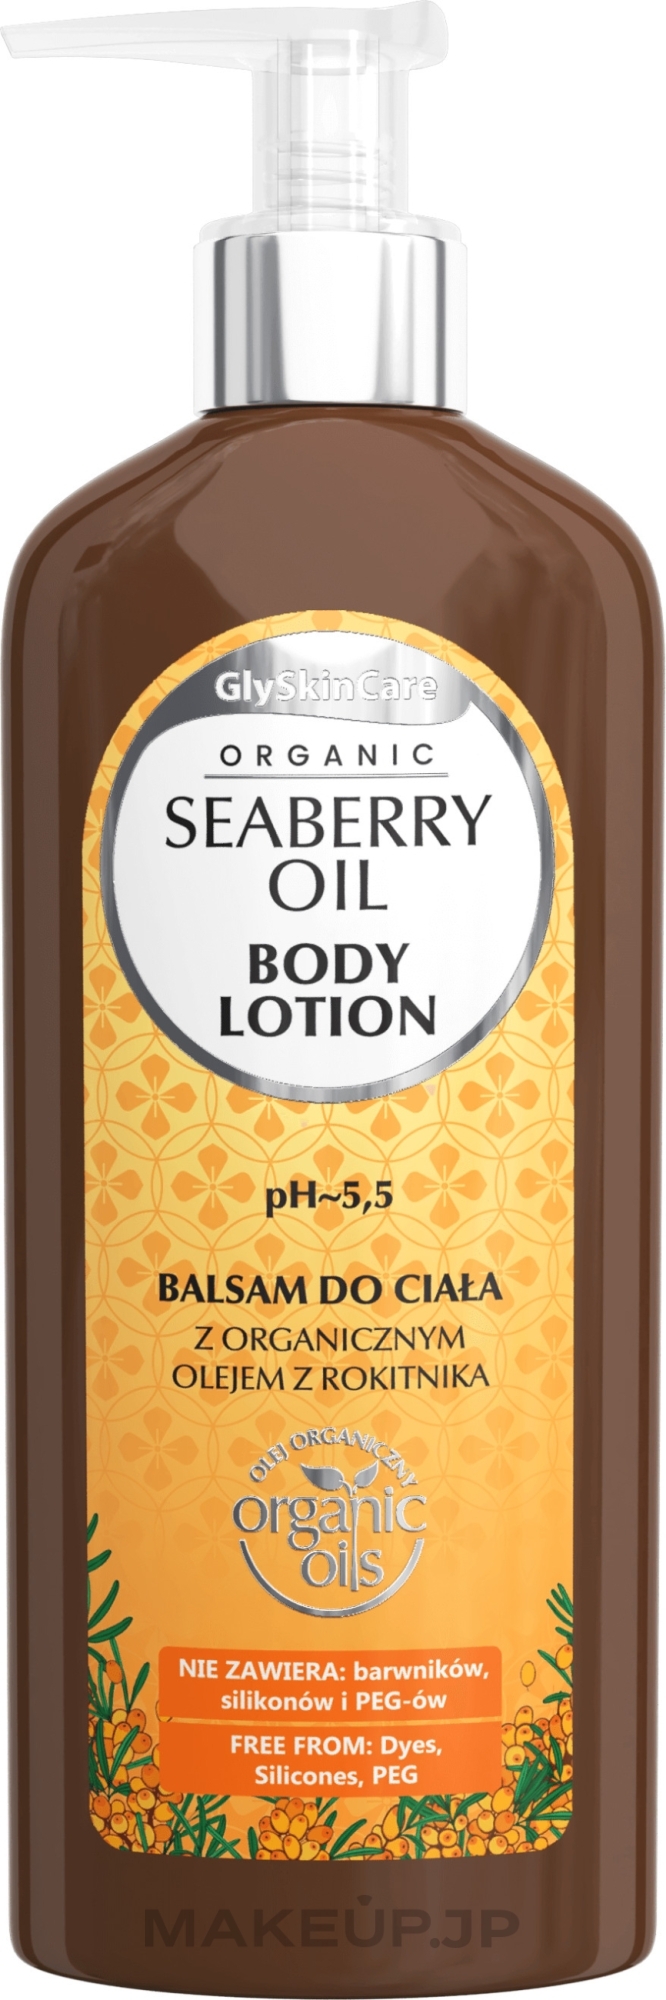 Body Lotion with Organic Sea Buckthorn Oil - GlySkinCare Organic Seaberry Oil Body Lotion — photo 250 ml